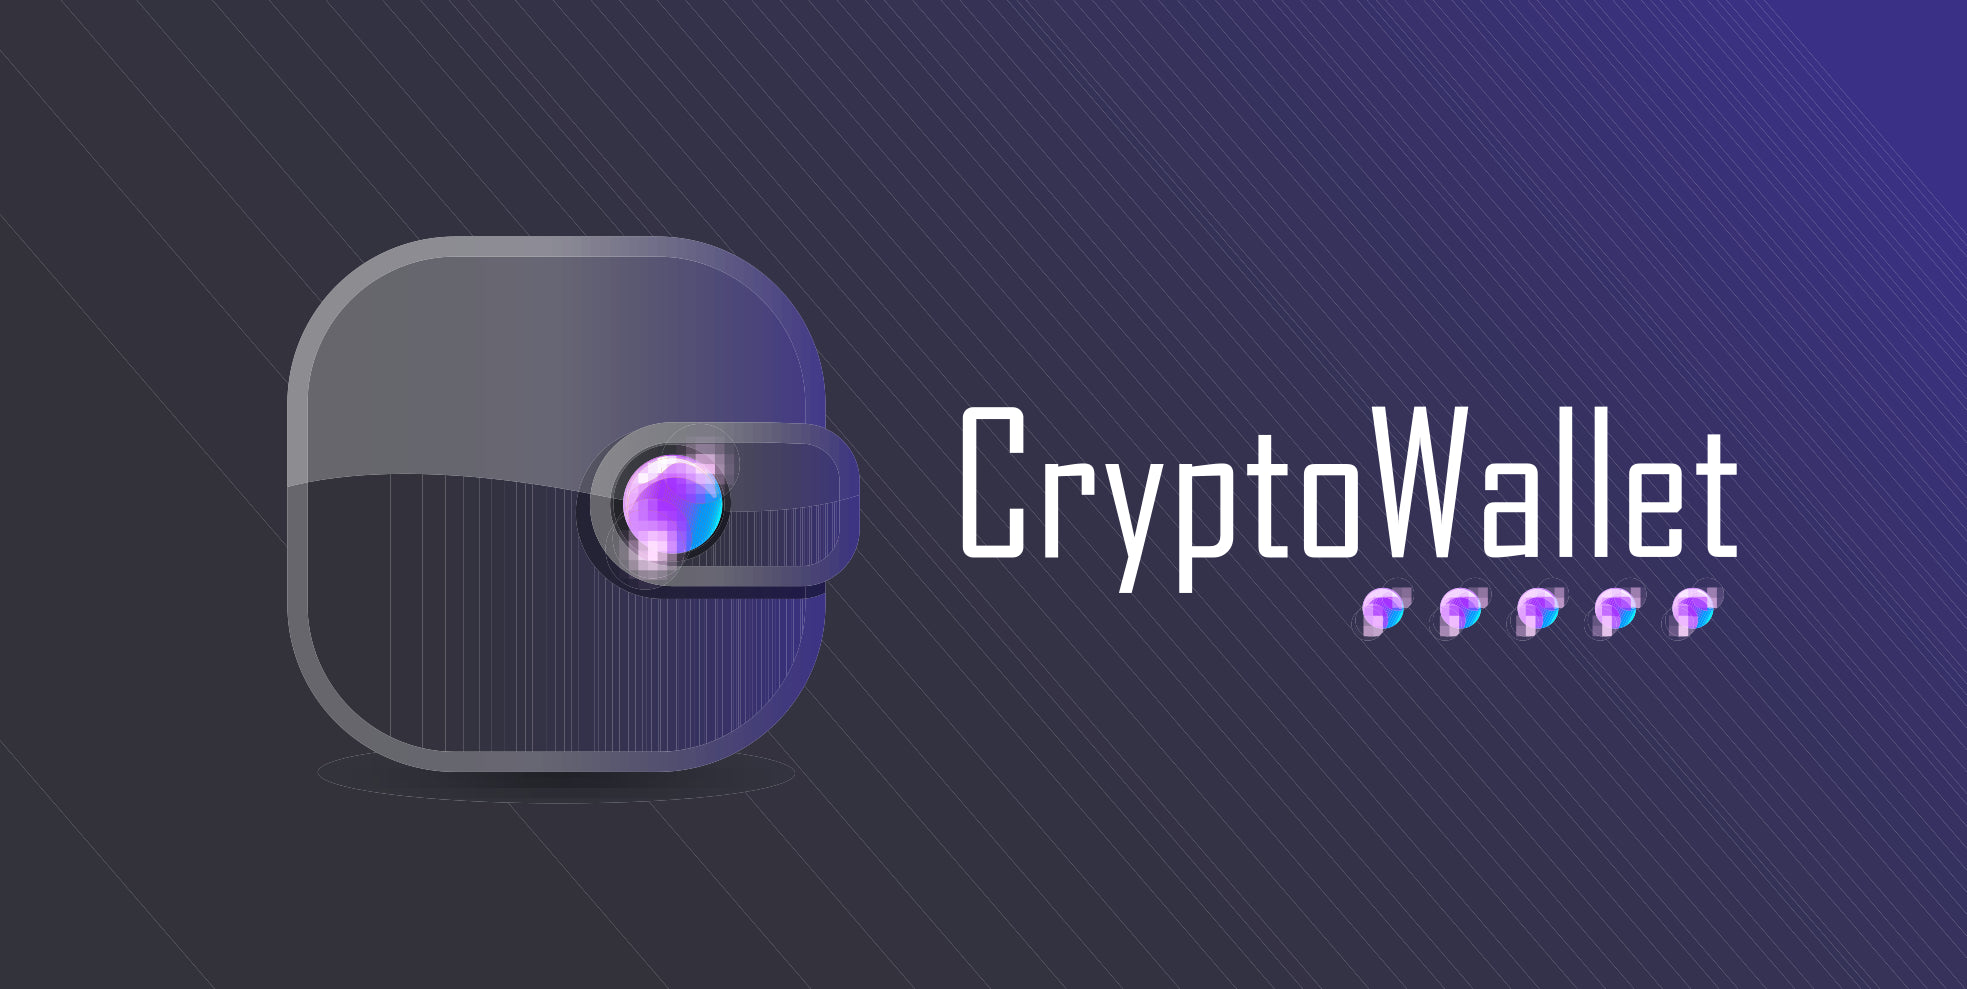 What Are Crypto Wallets?